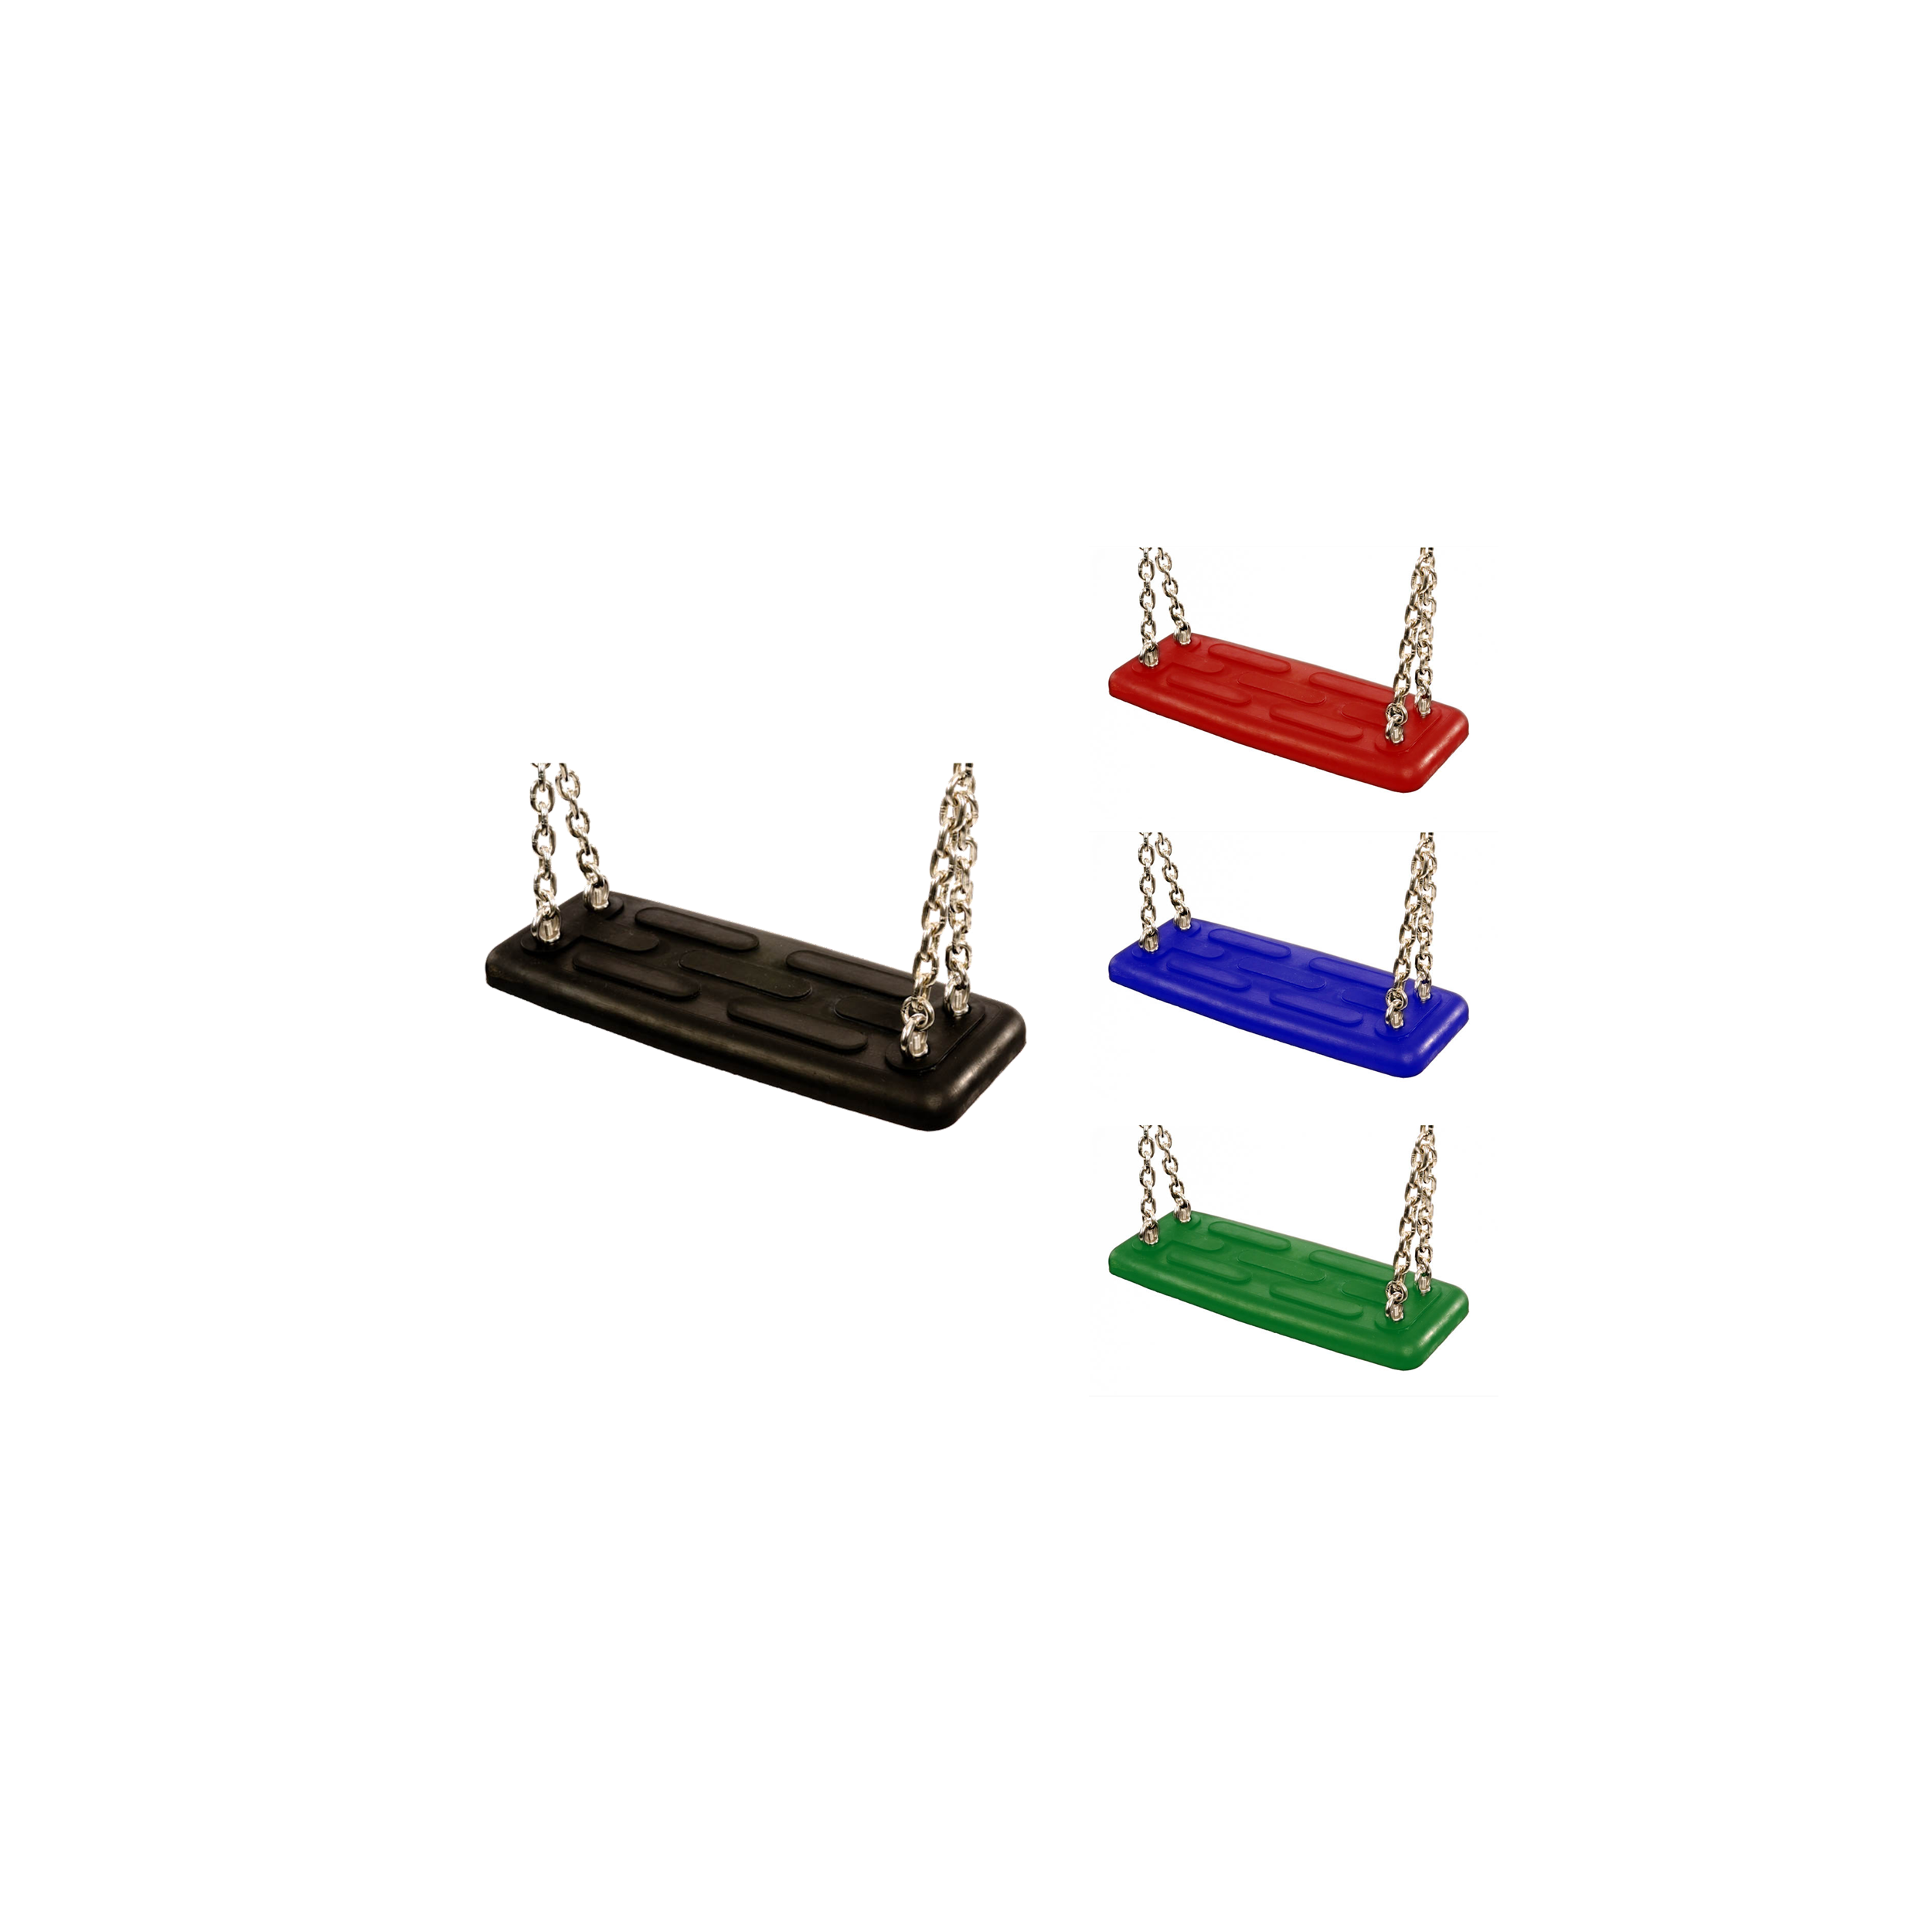 Commercial safety rubber swing seat type 1 blauw Zonder ketting